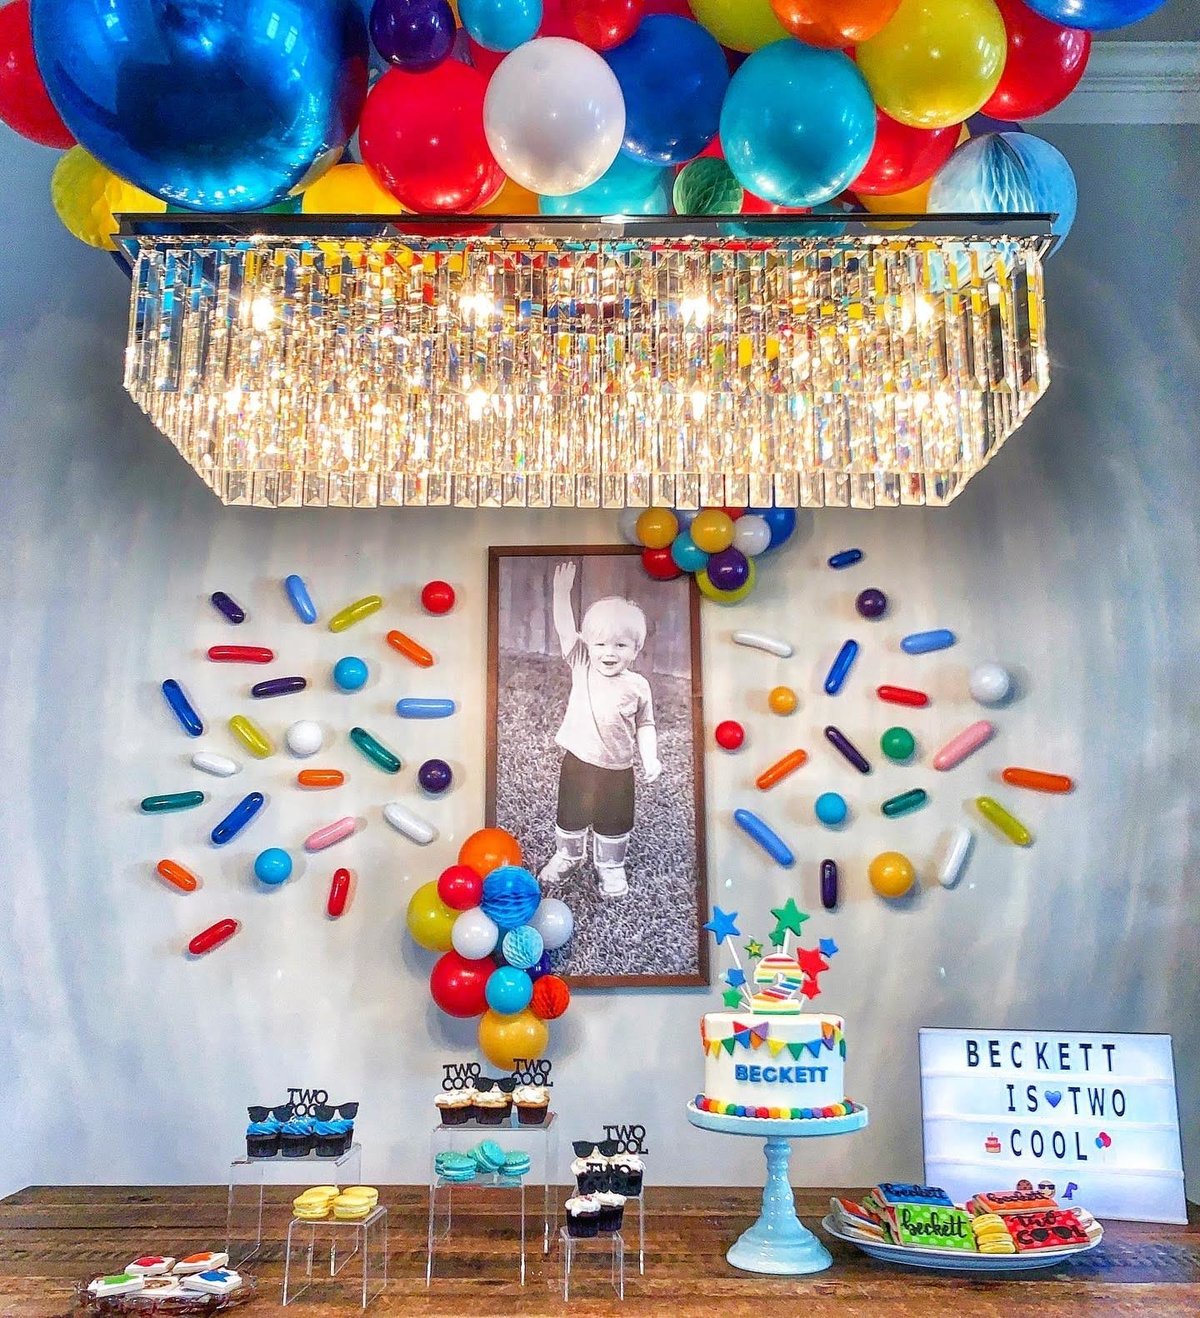 Sprinkle balloons for kids party